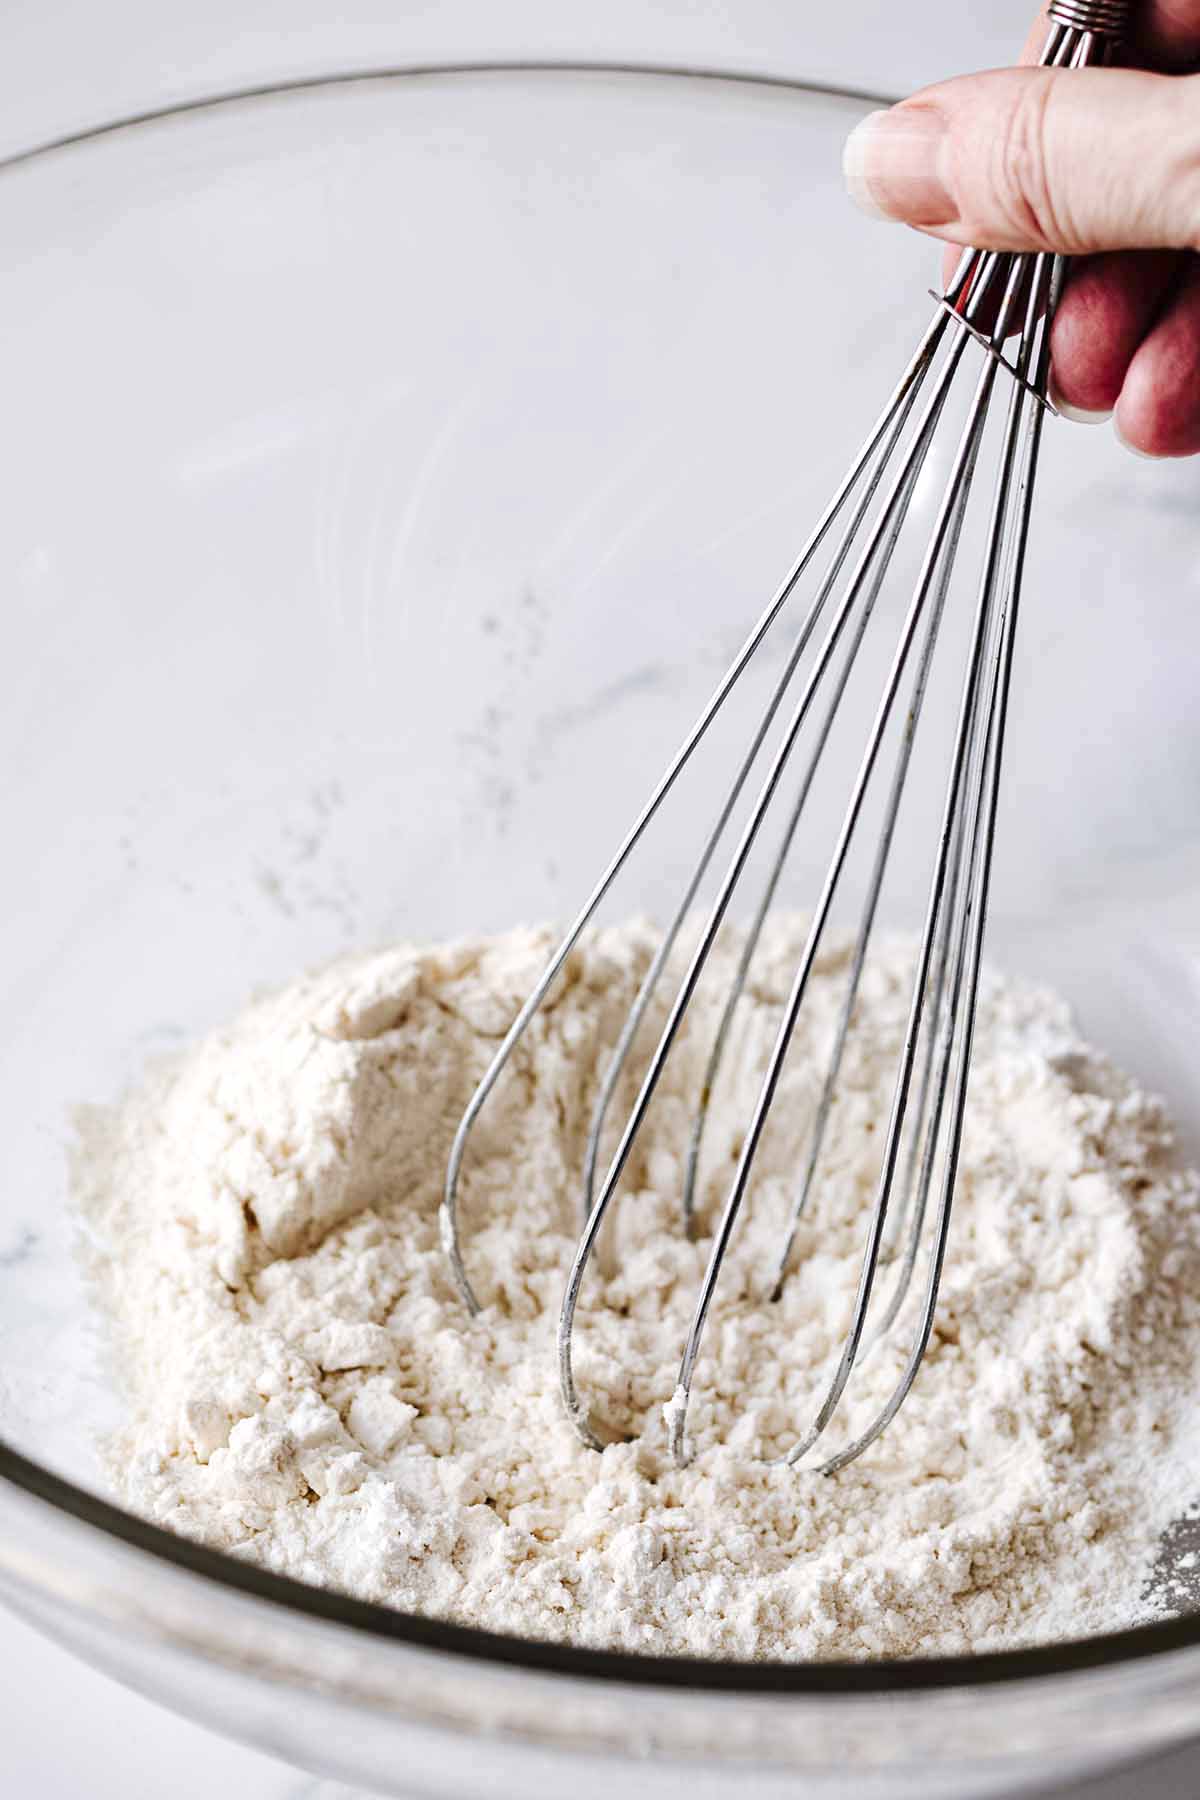 Dry ingredients in a large glass bowl with a whisk.